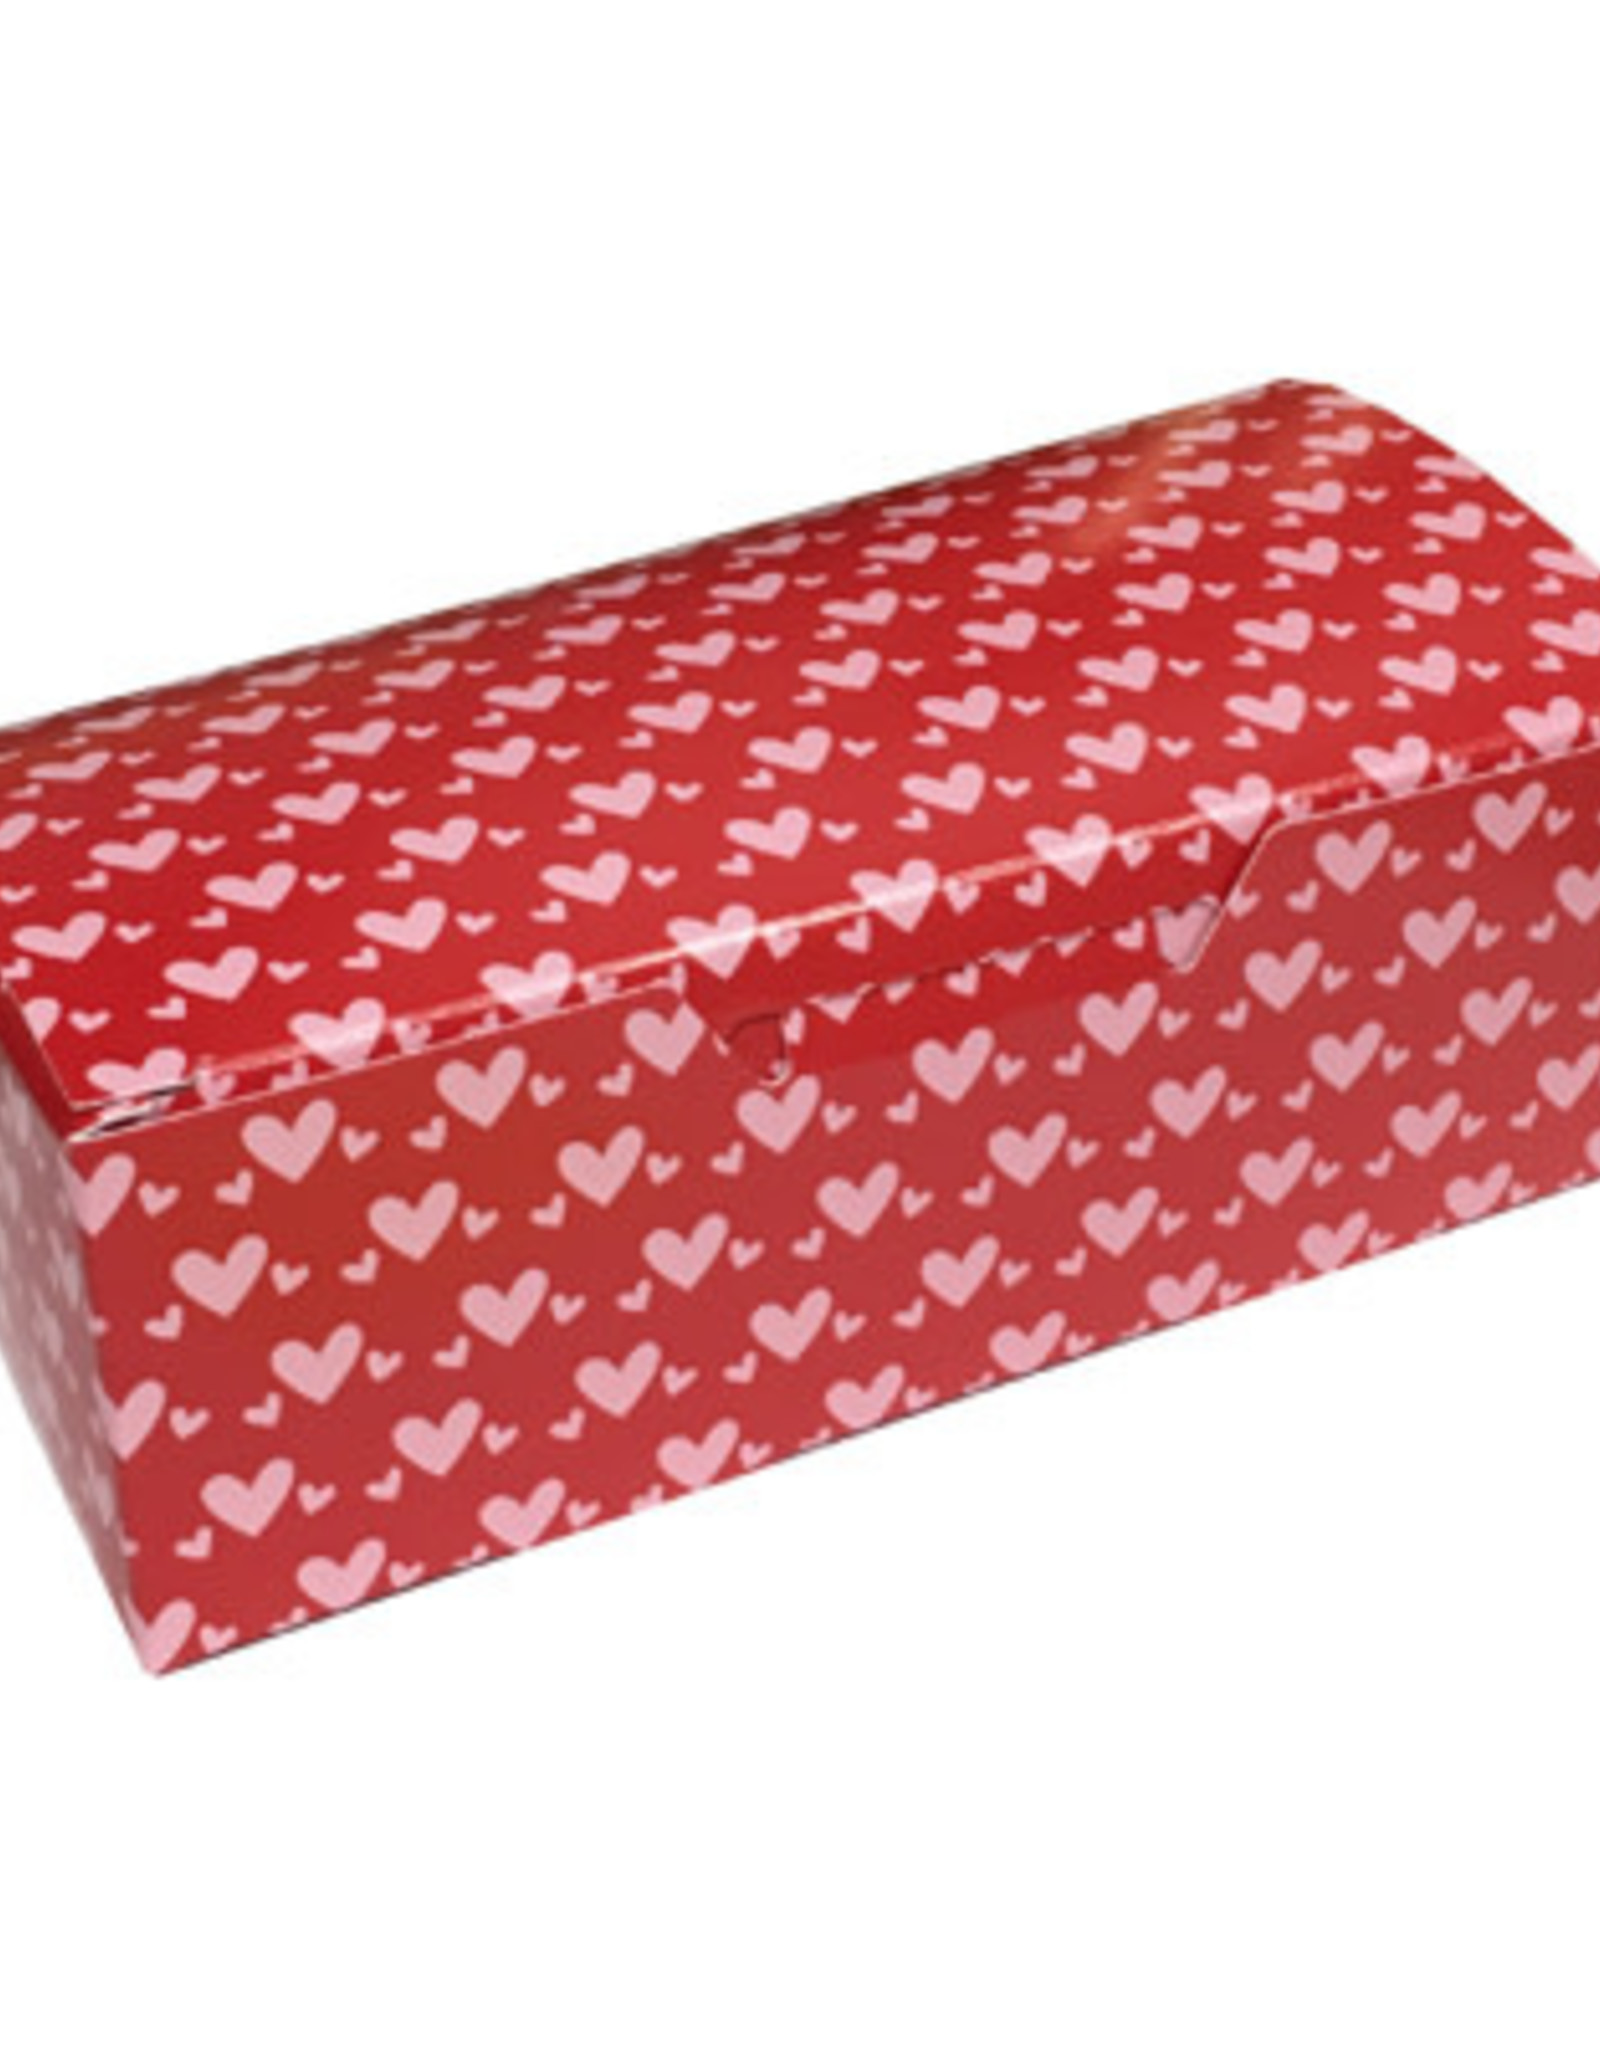 Little Hearts Candy Box (1/2#)